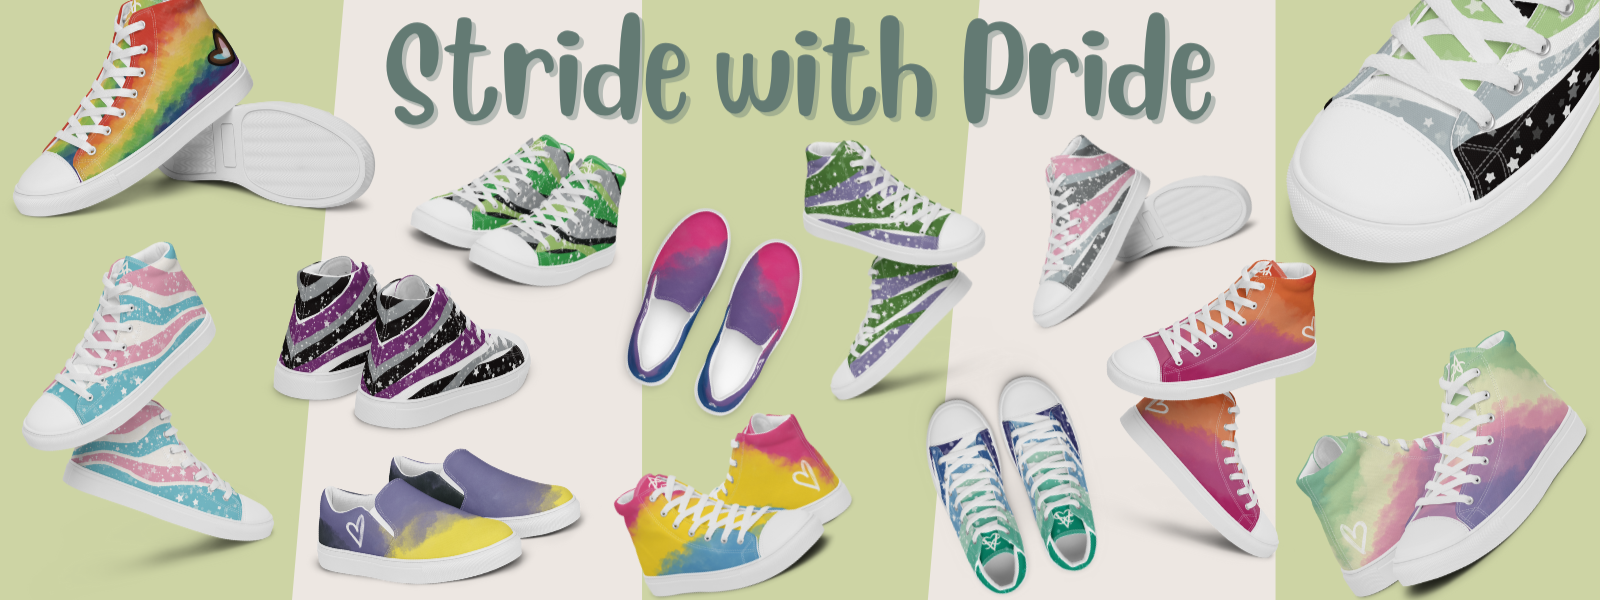 The Stride with pride graphic with previews of a shoe of each flag to be made.